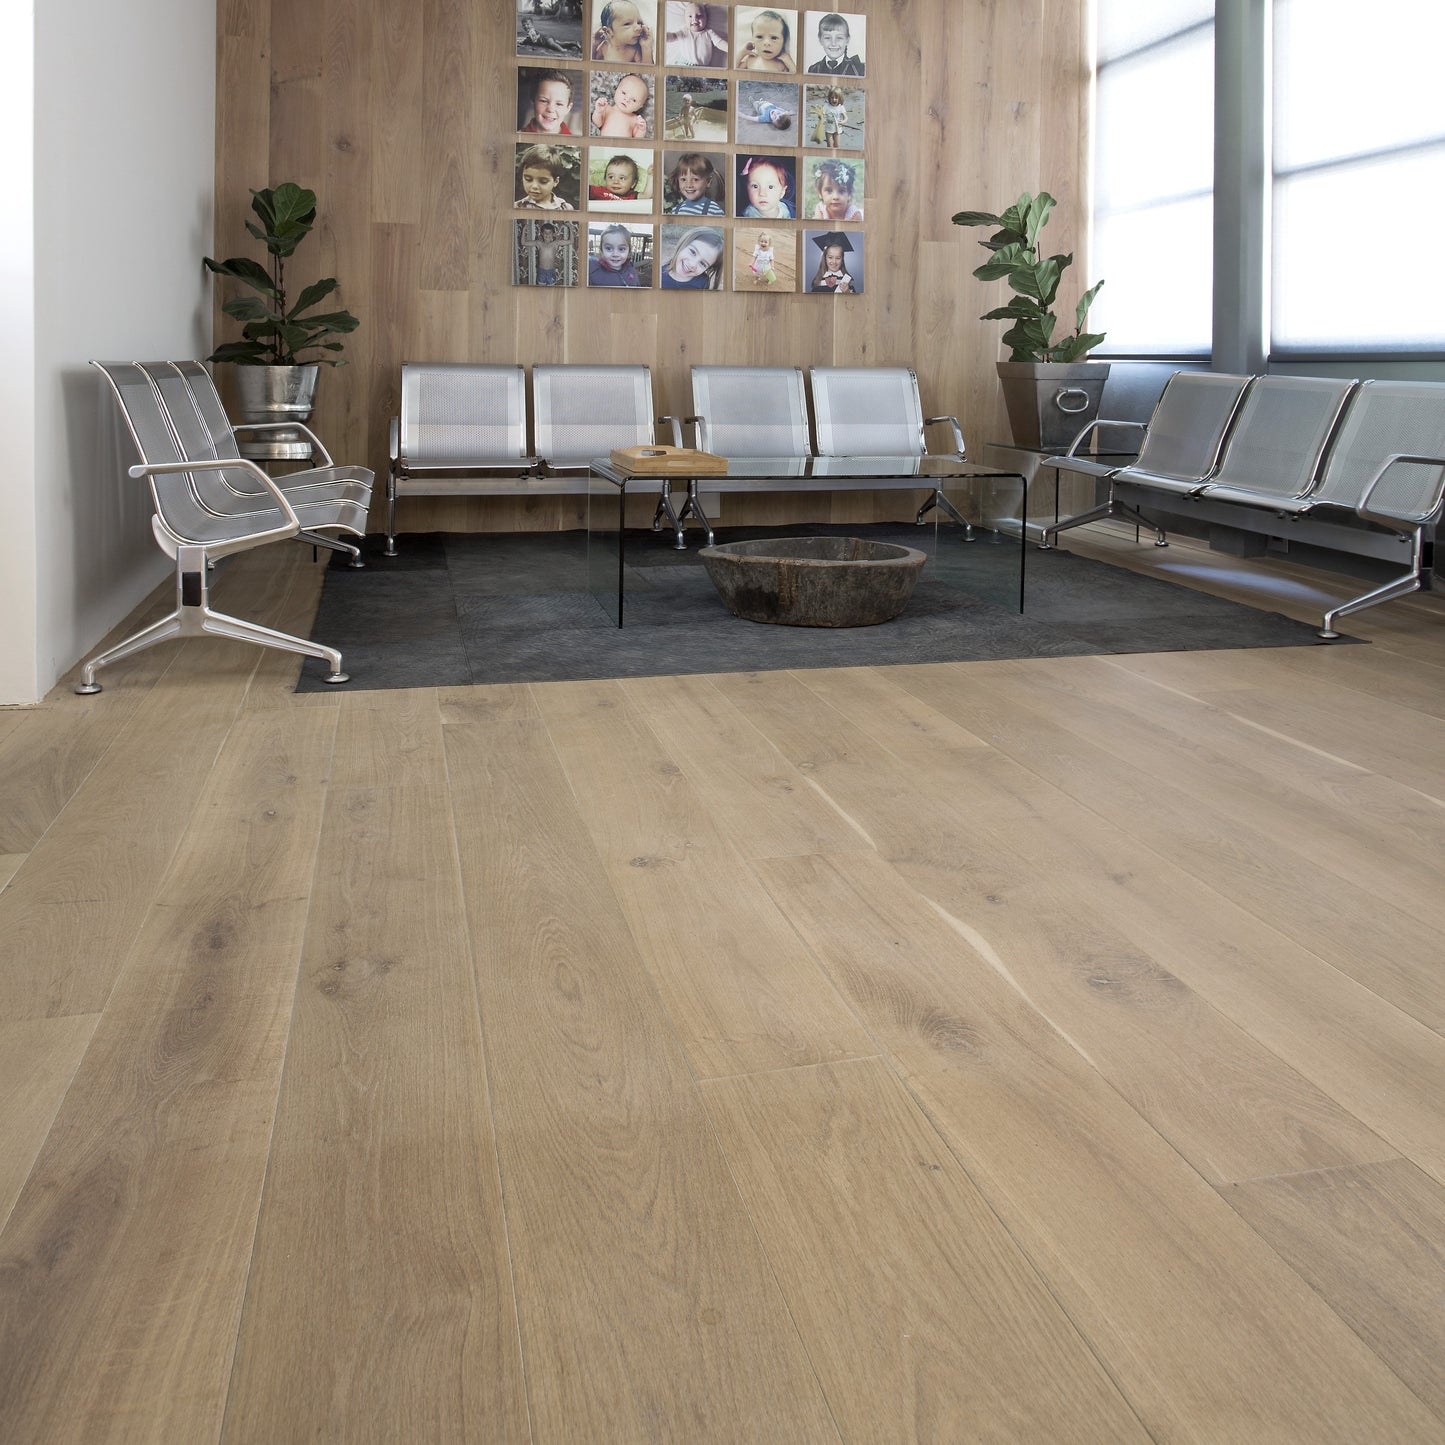 Neptune is the most beautiful Engineered oak offering a neutral wood 